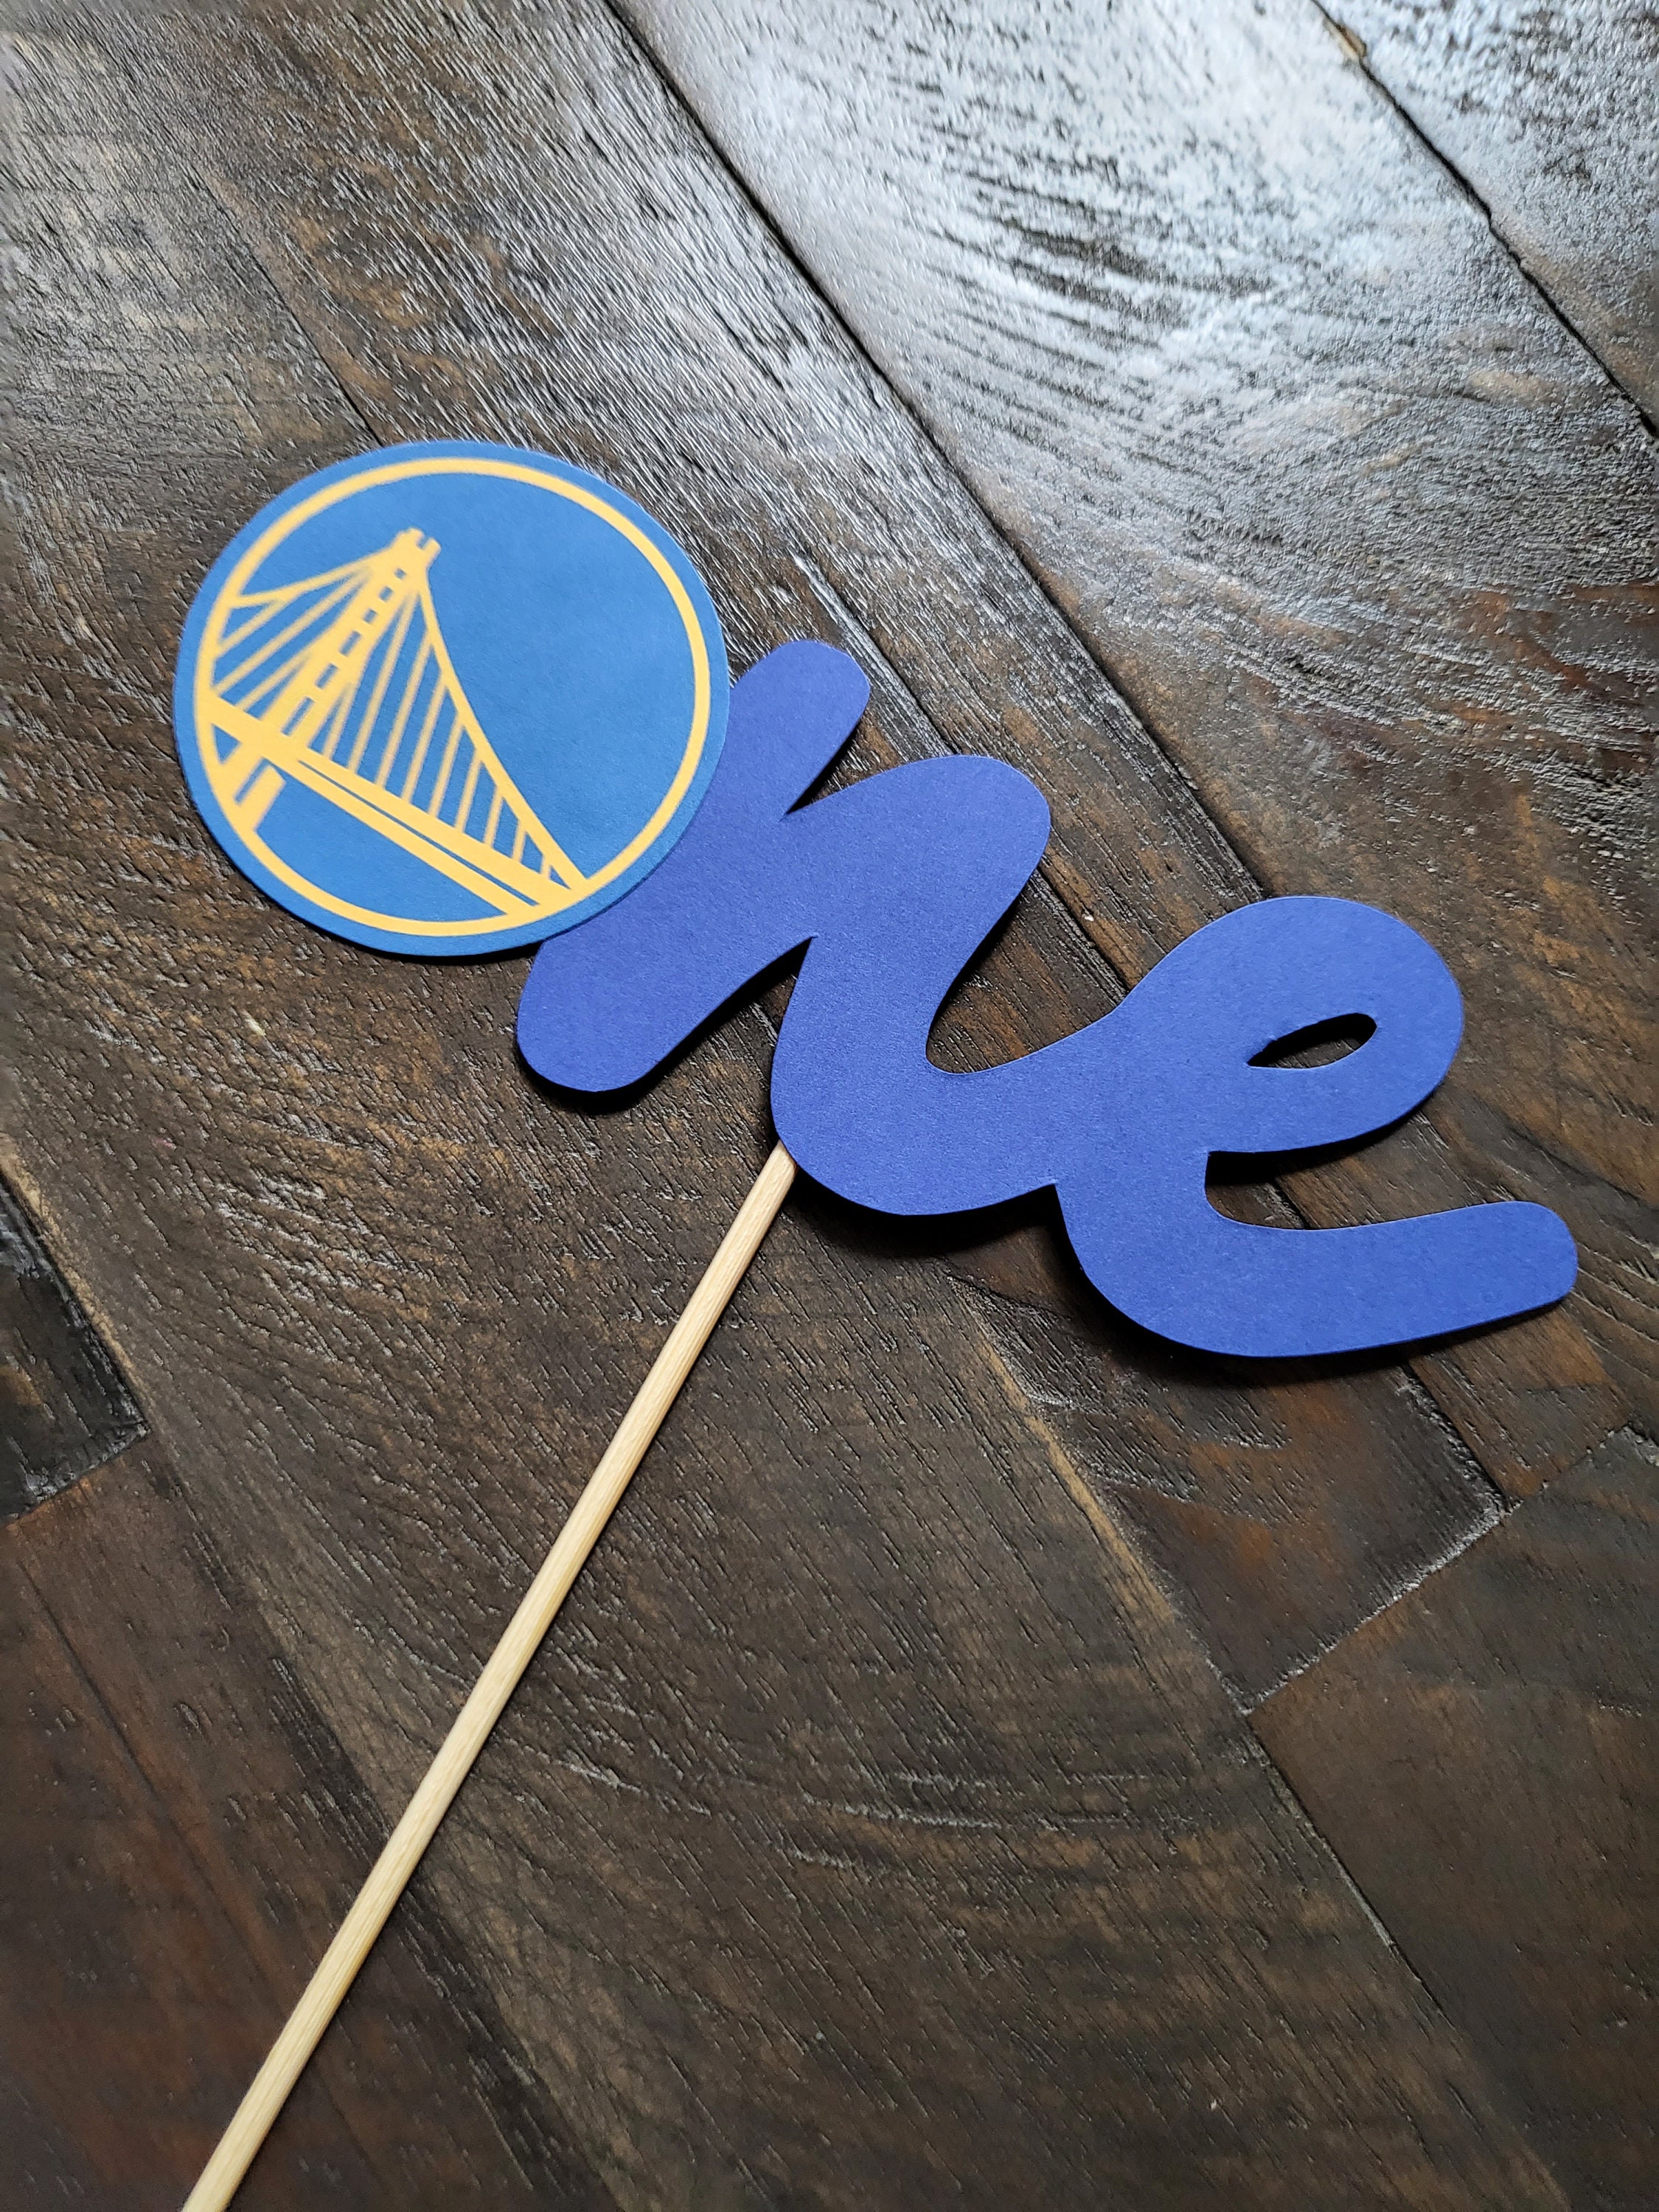 Golden State Cake Topper Stephen Curry Cake Topper NBA Cake Topper Golden  State Caprisun Golden State Boxes Golden State Chips Bags 